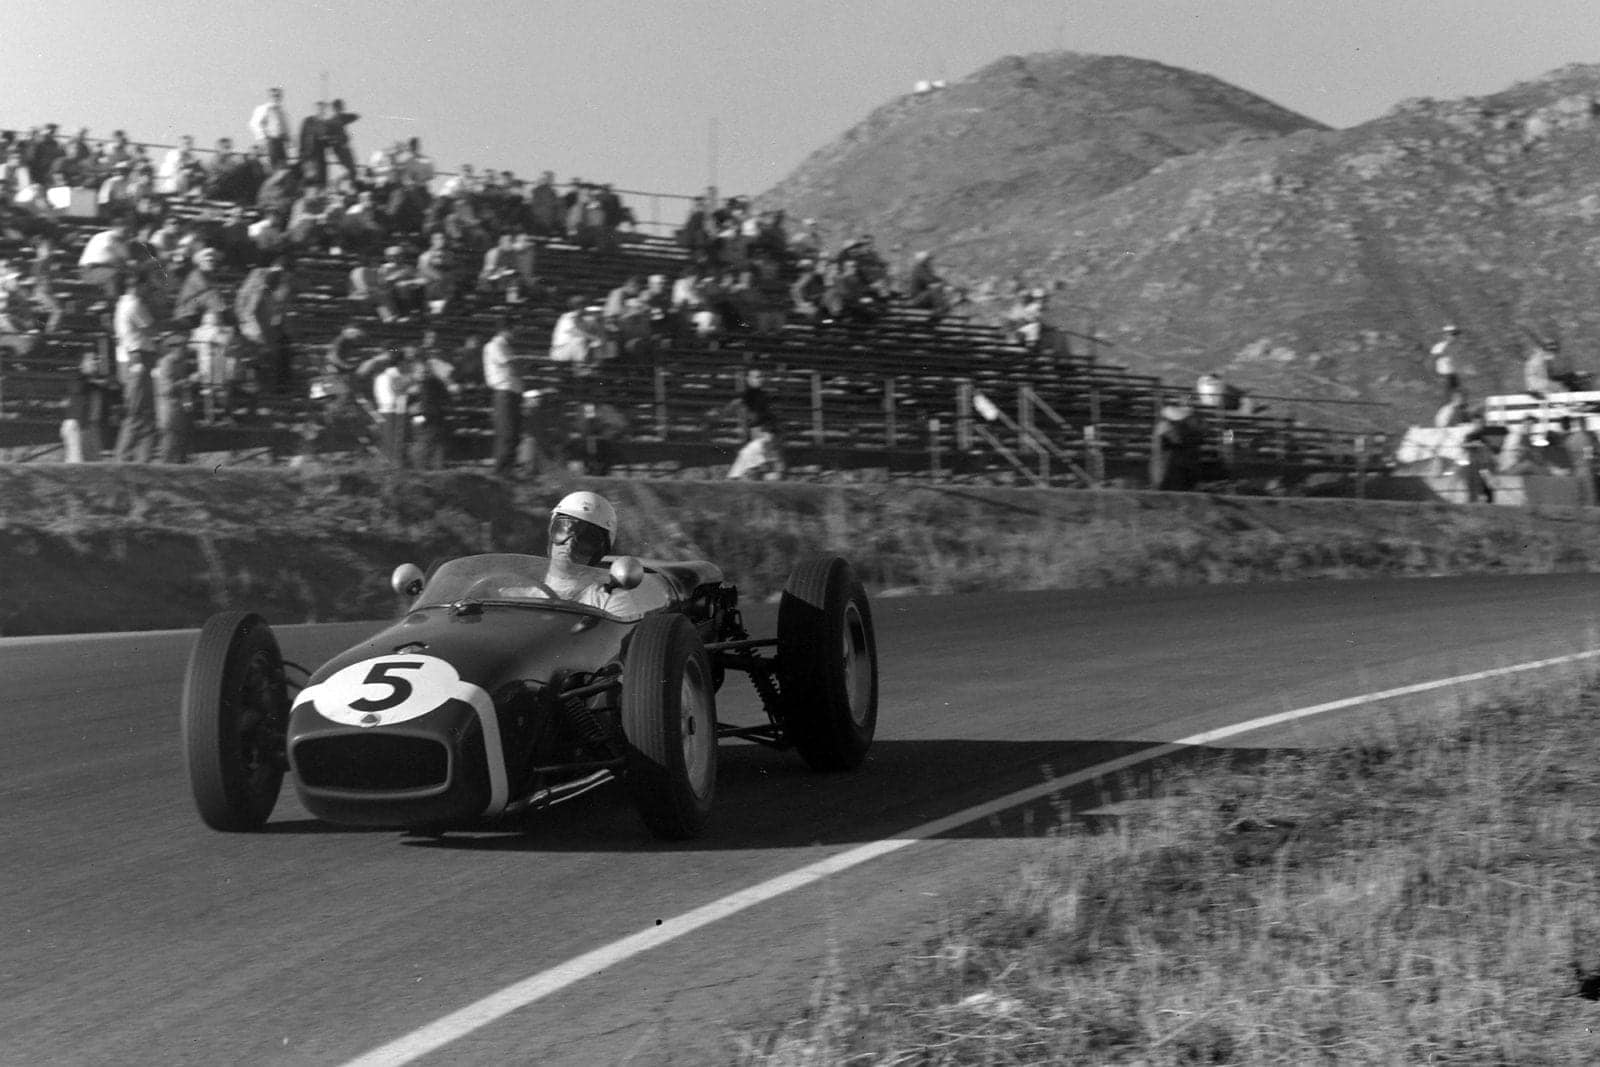 Stirling Moss took his first win since returning from injury